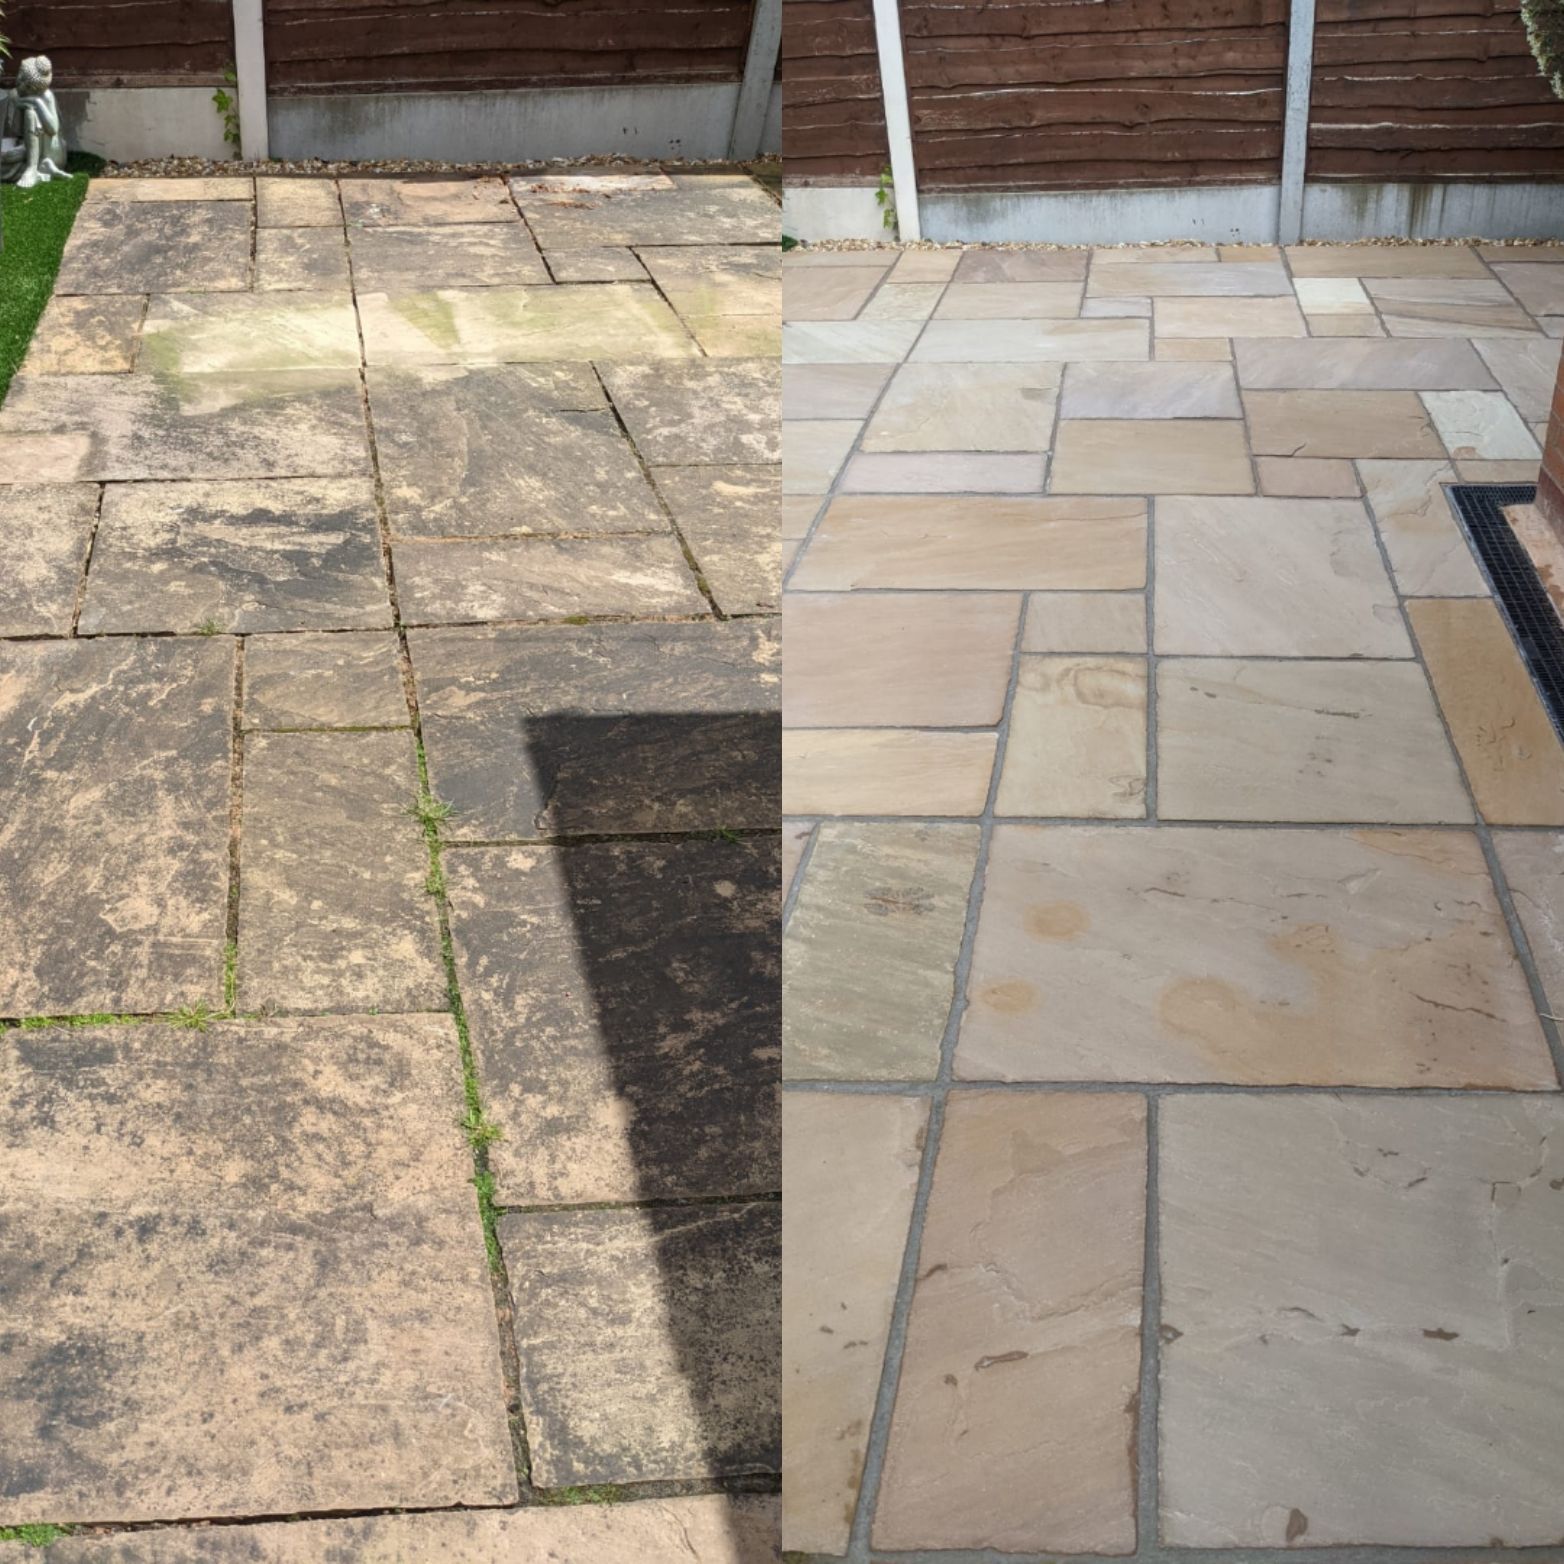 INDIAN SANDSTONE PATIO FULL RESTORATION, REGROUTING, DEEP CLEANING AND SEALING IN  GREATER MANCHESTE